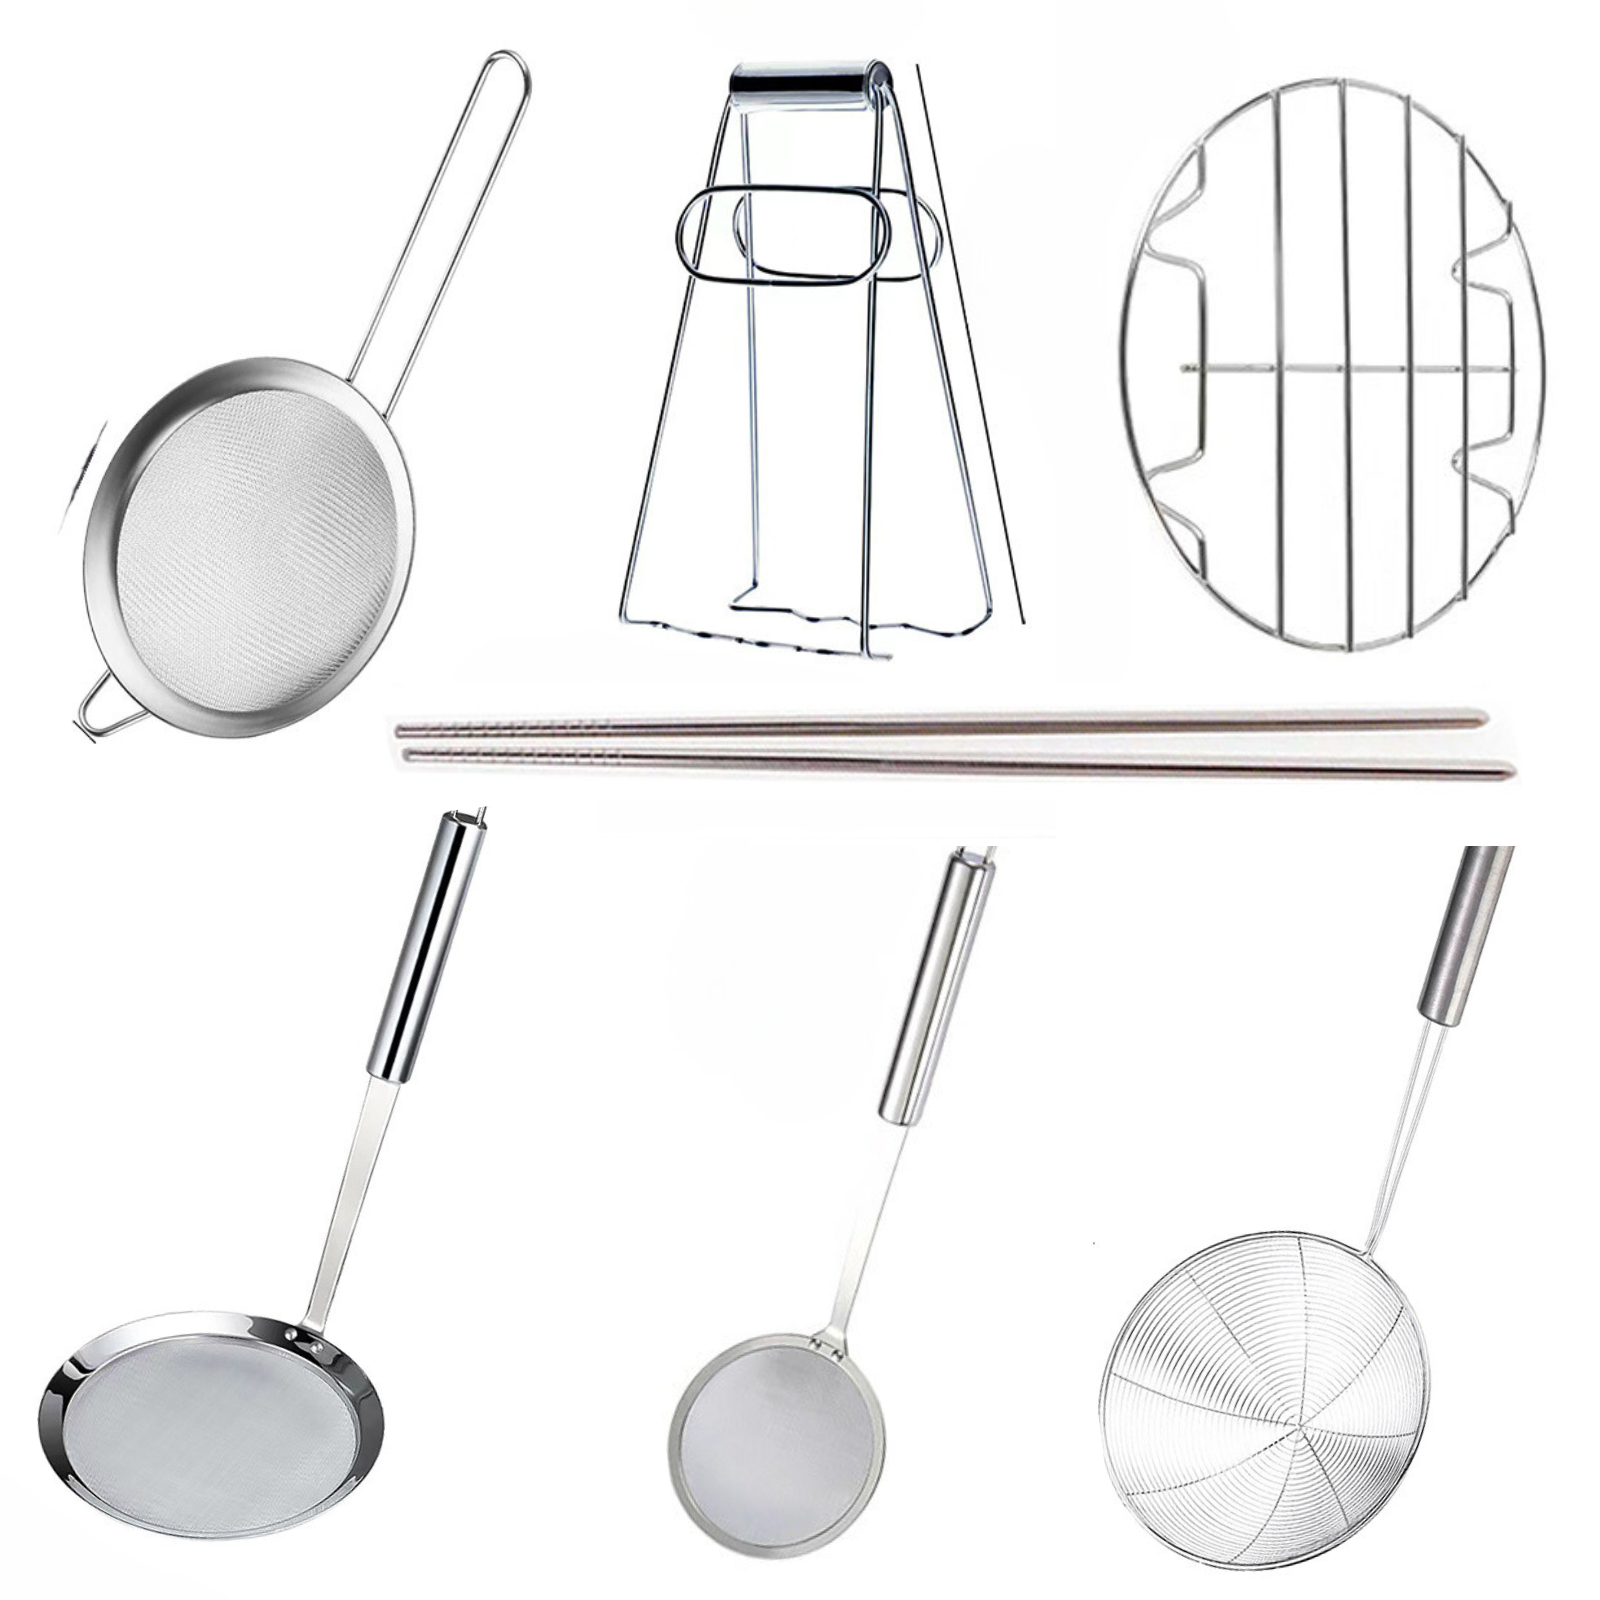 NOW  Collections: Chinese Cooking Tools